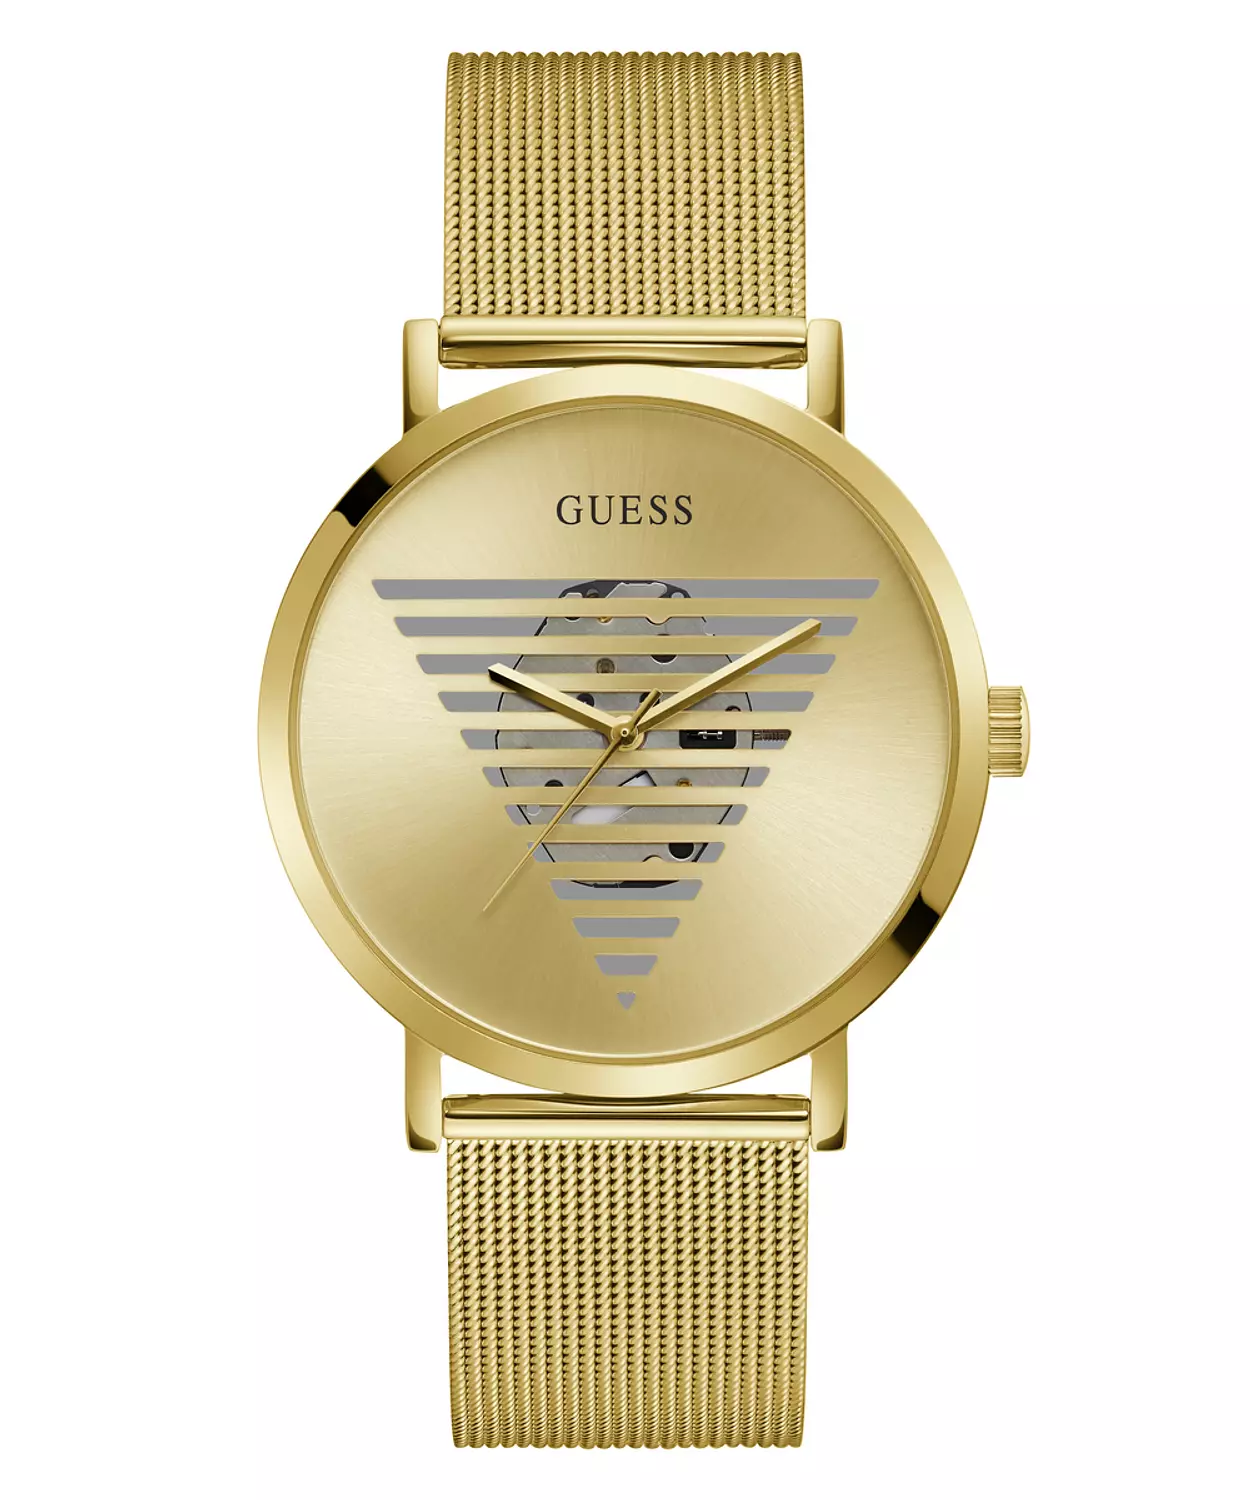 GUESS GW0502G1 ANALOG WATCH For Men Round Shape Gold Stainless Steel/Mesh Polished Bracelet hover image